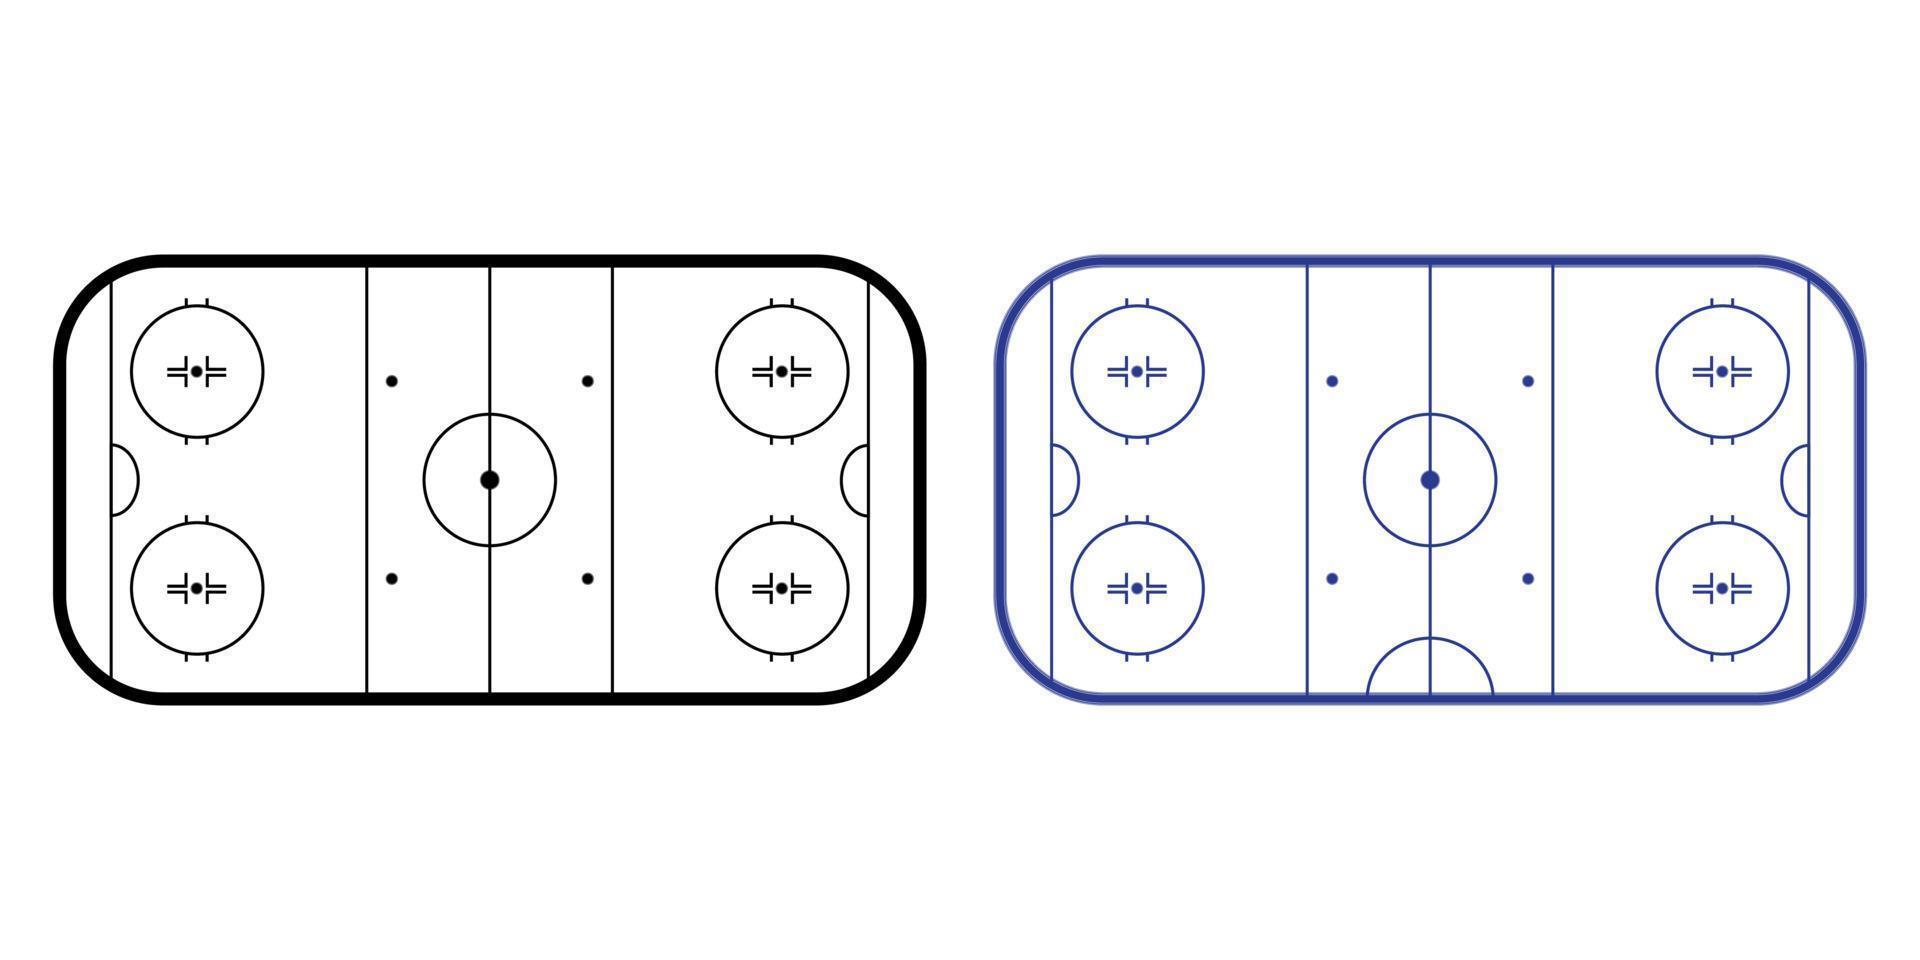 Ice hockey rink, top view. Hockey field outline isolated on white background. Vector illustration.